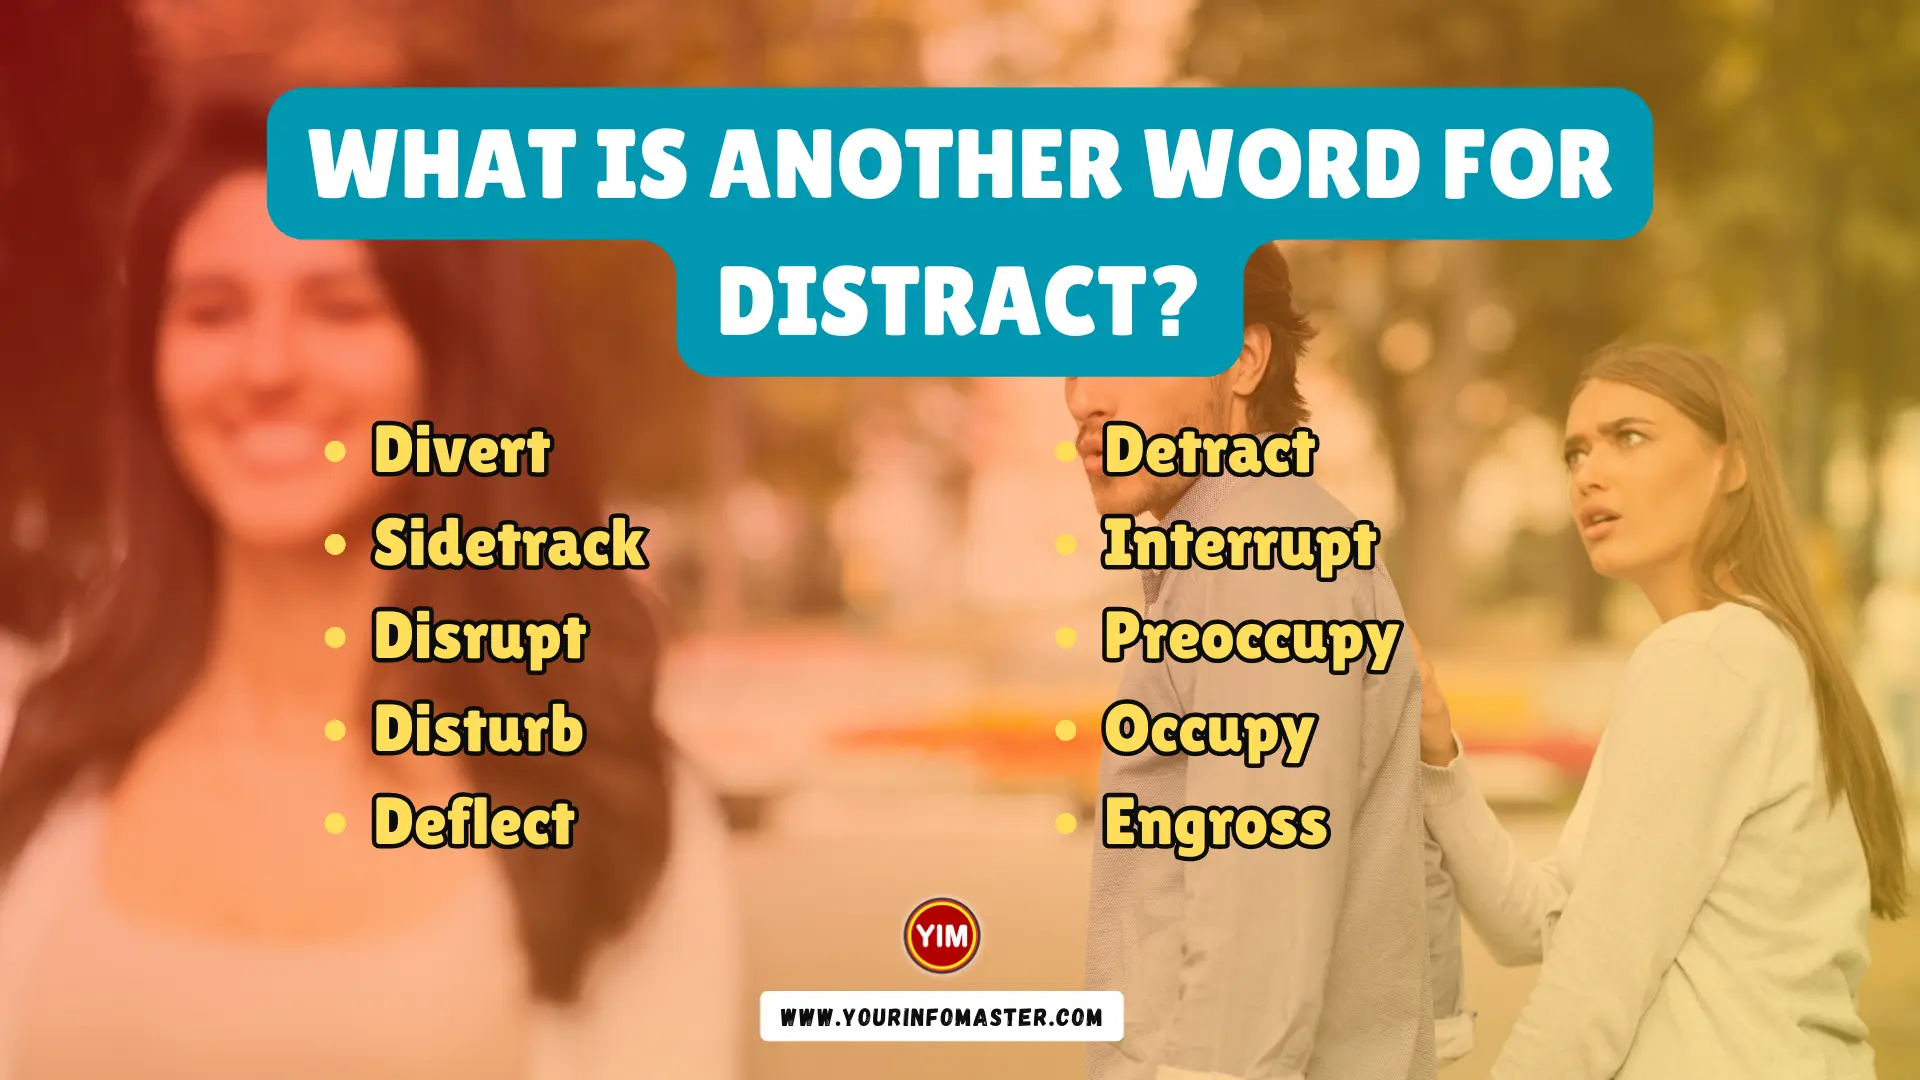 What is another word for Distract